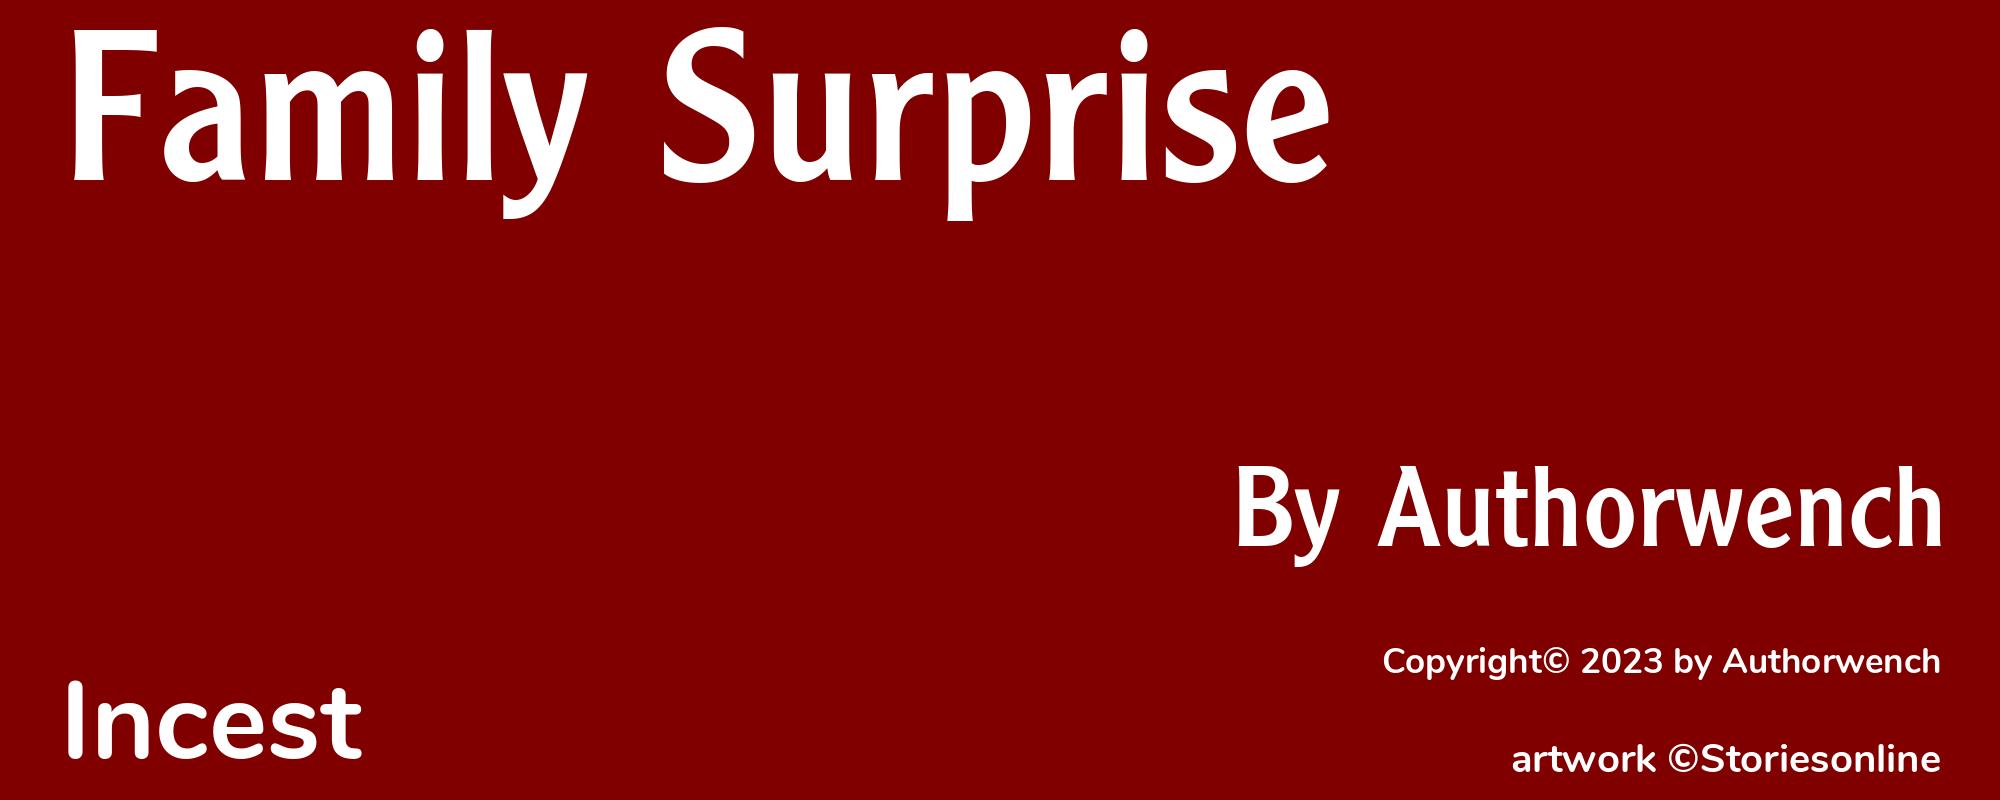 Family Surprise - Cover